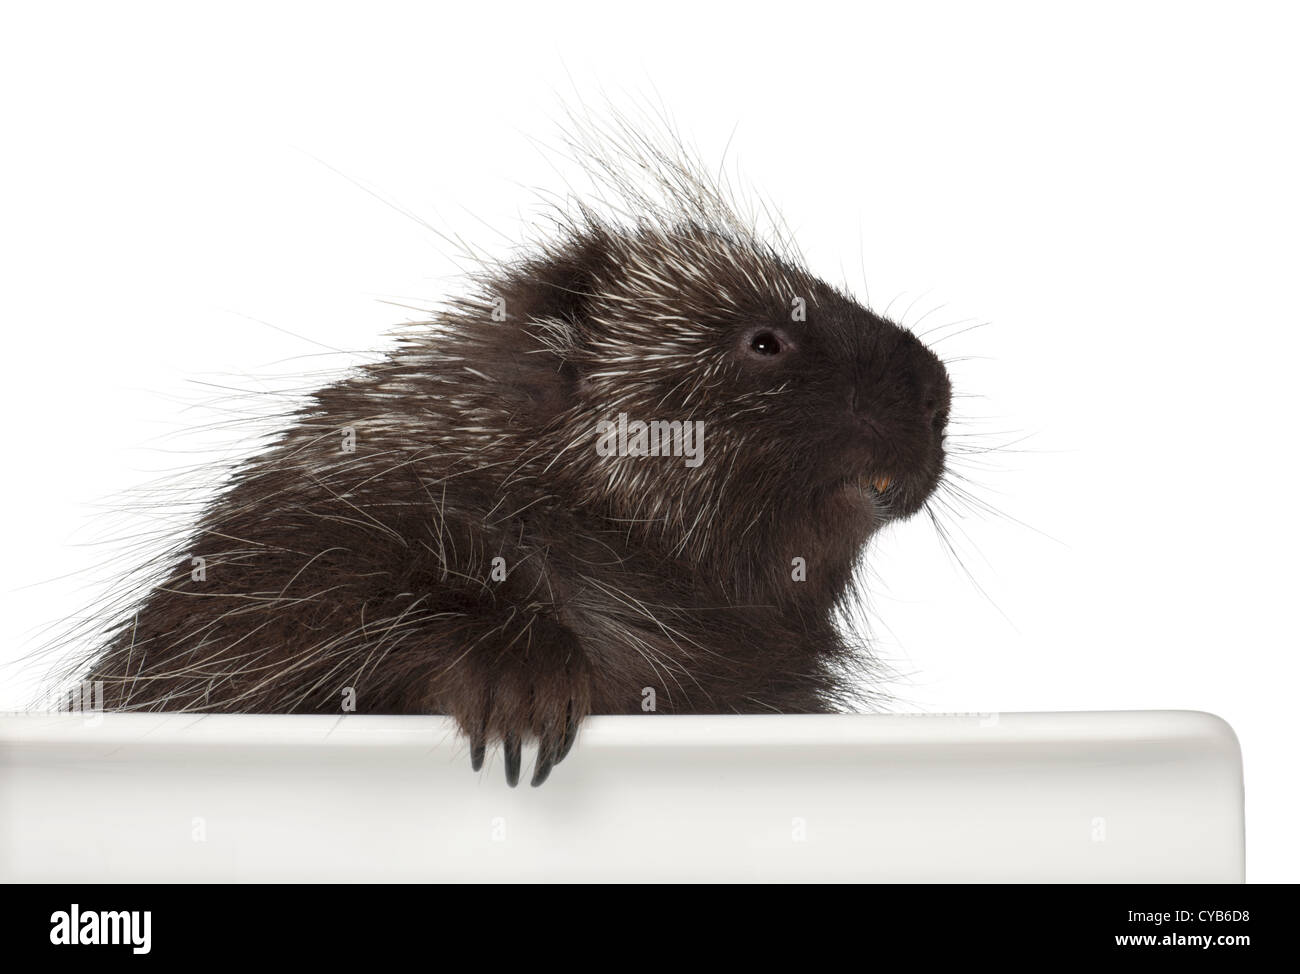 North American Porcupine, Erethizon dorsatum, also known as Canadian Porcupine or Common Porcupine against white background Stock Photo